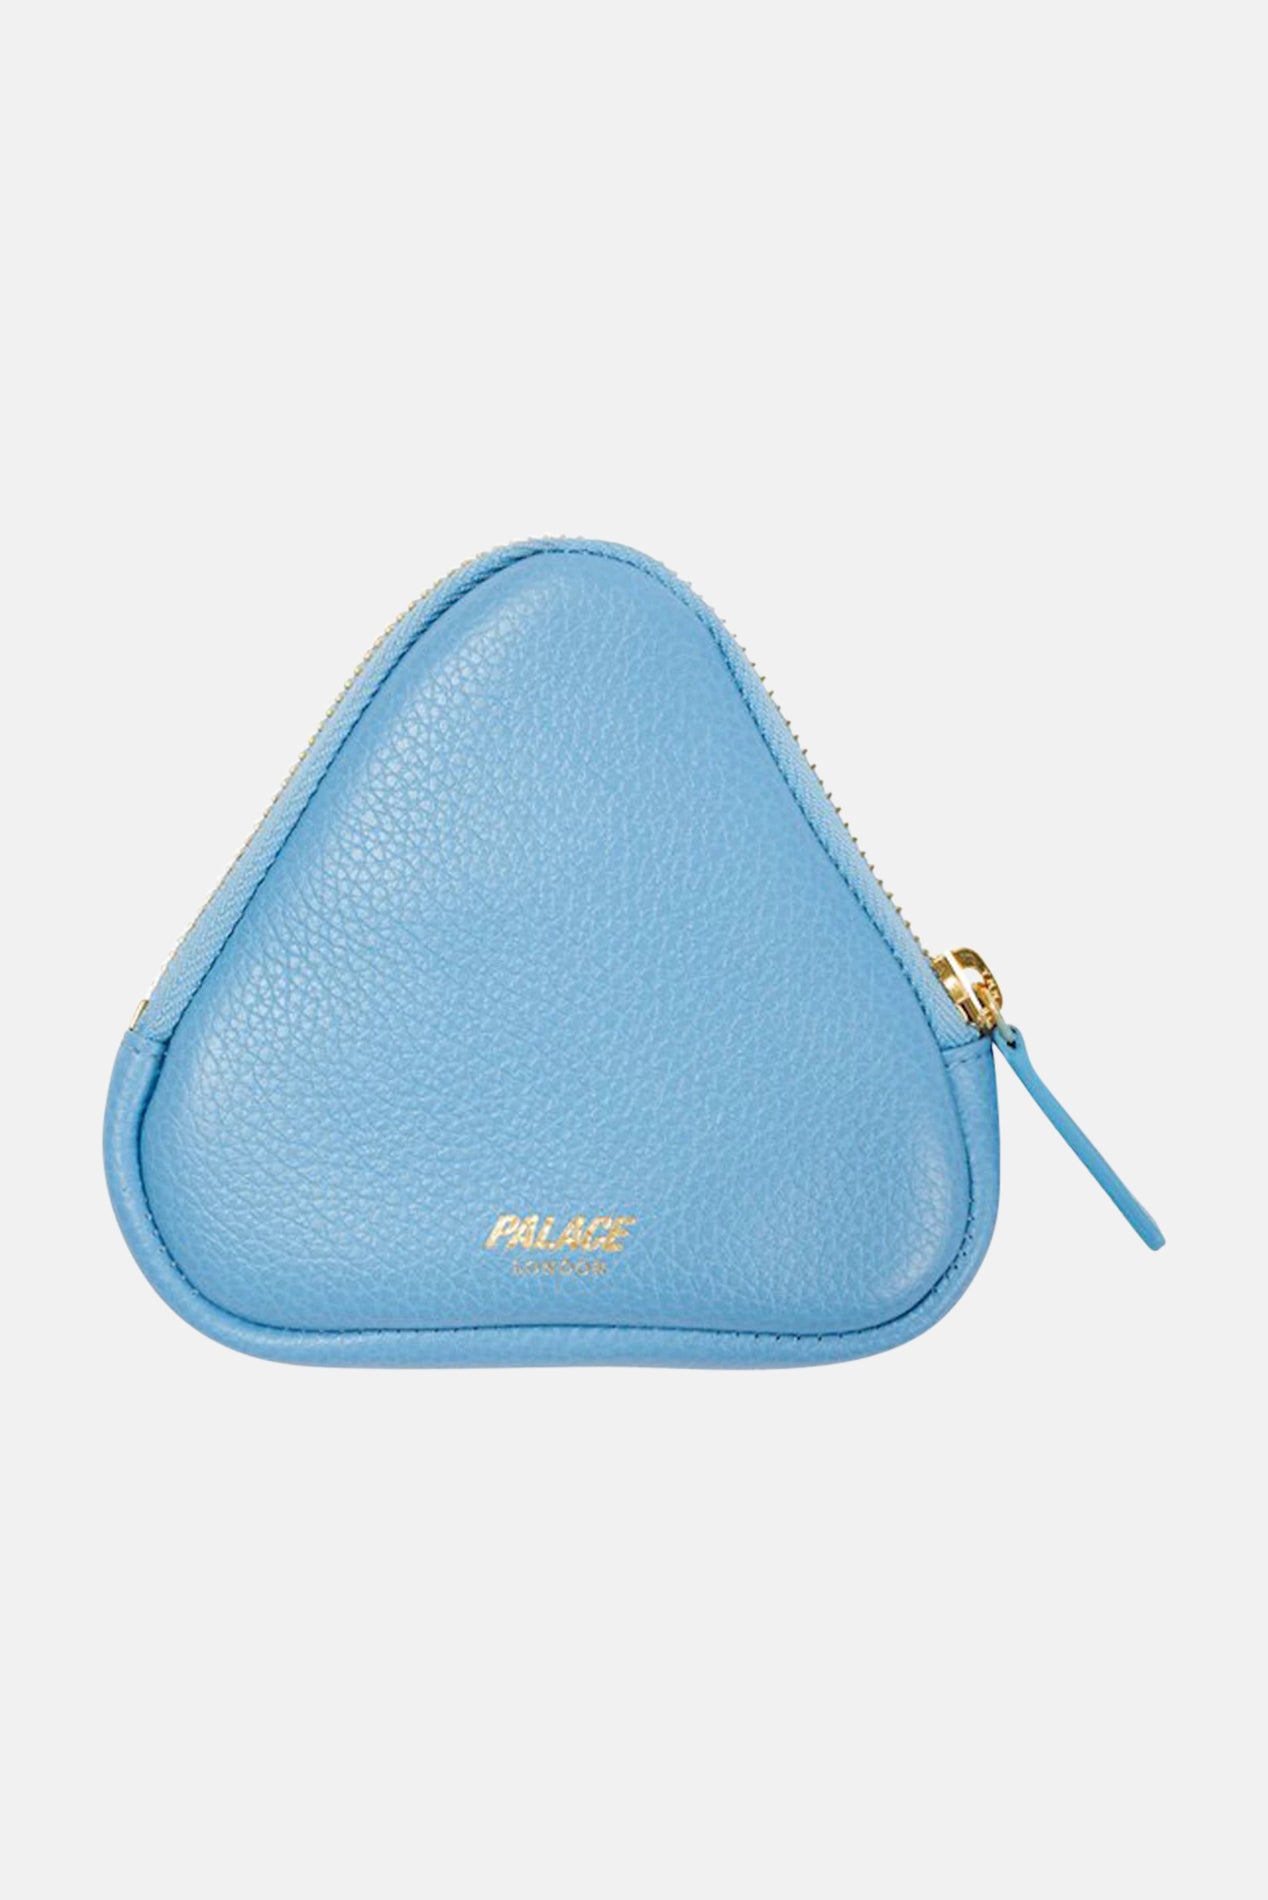 Palace leather coin wallet Blue – blueandcream